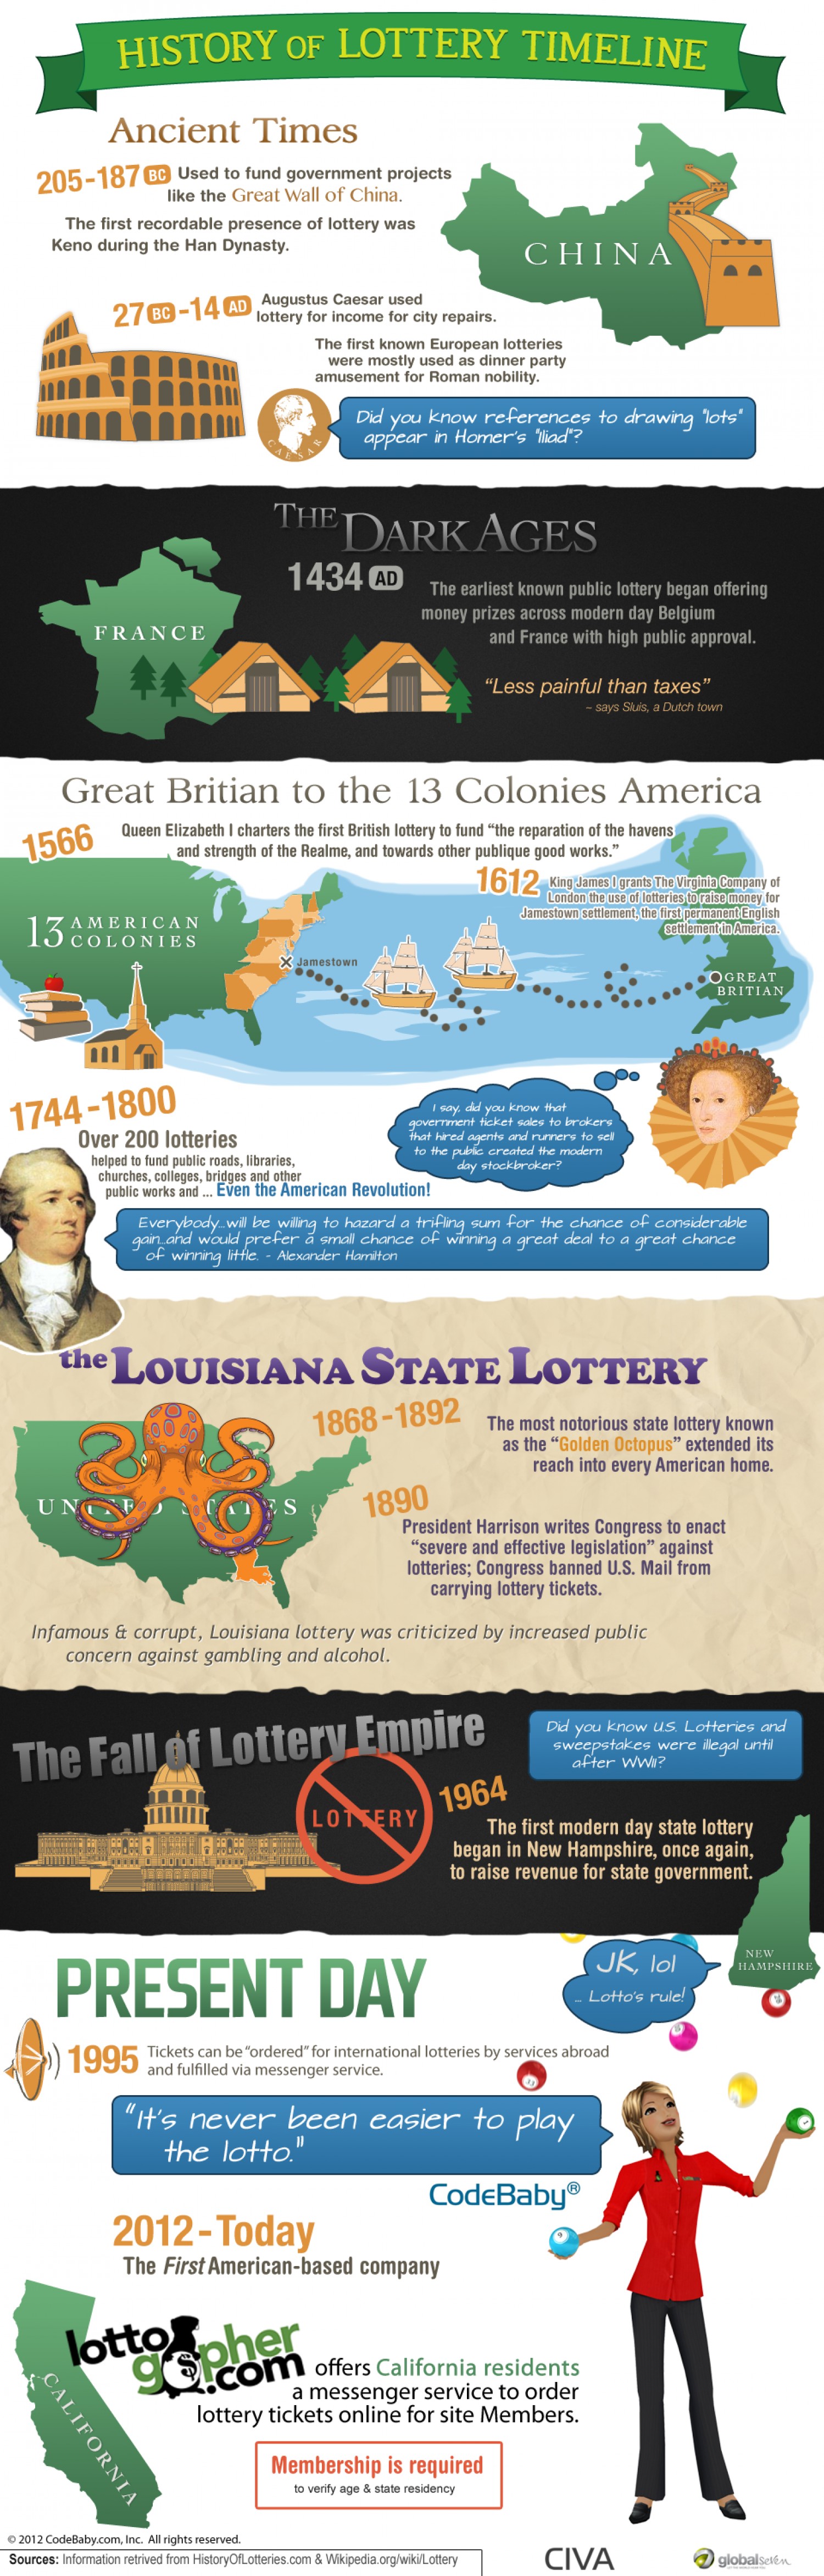 History of Lottery Timeline